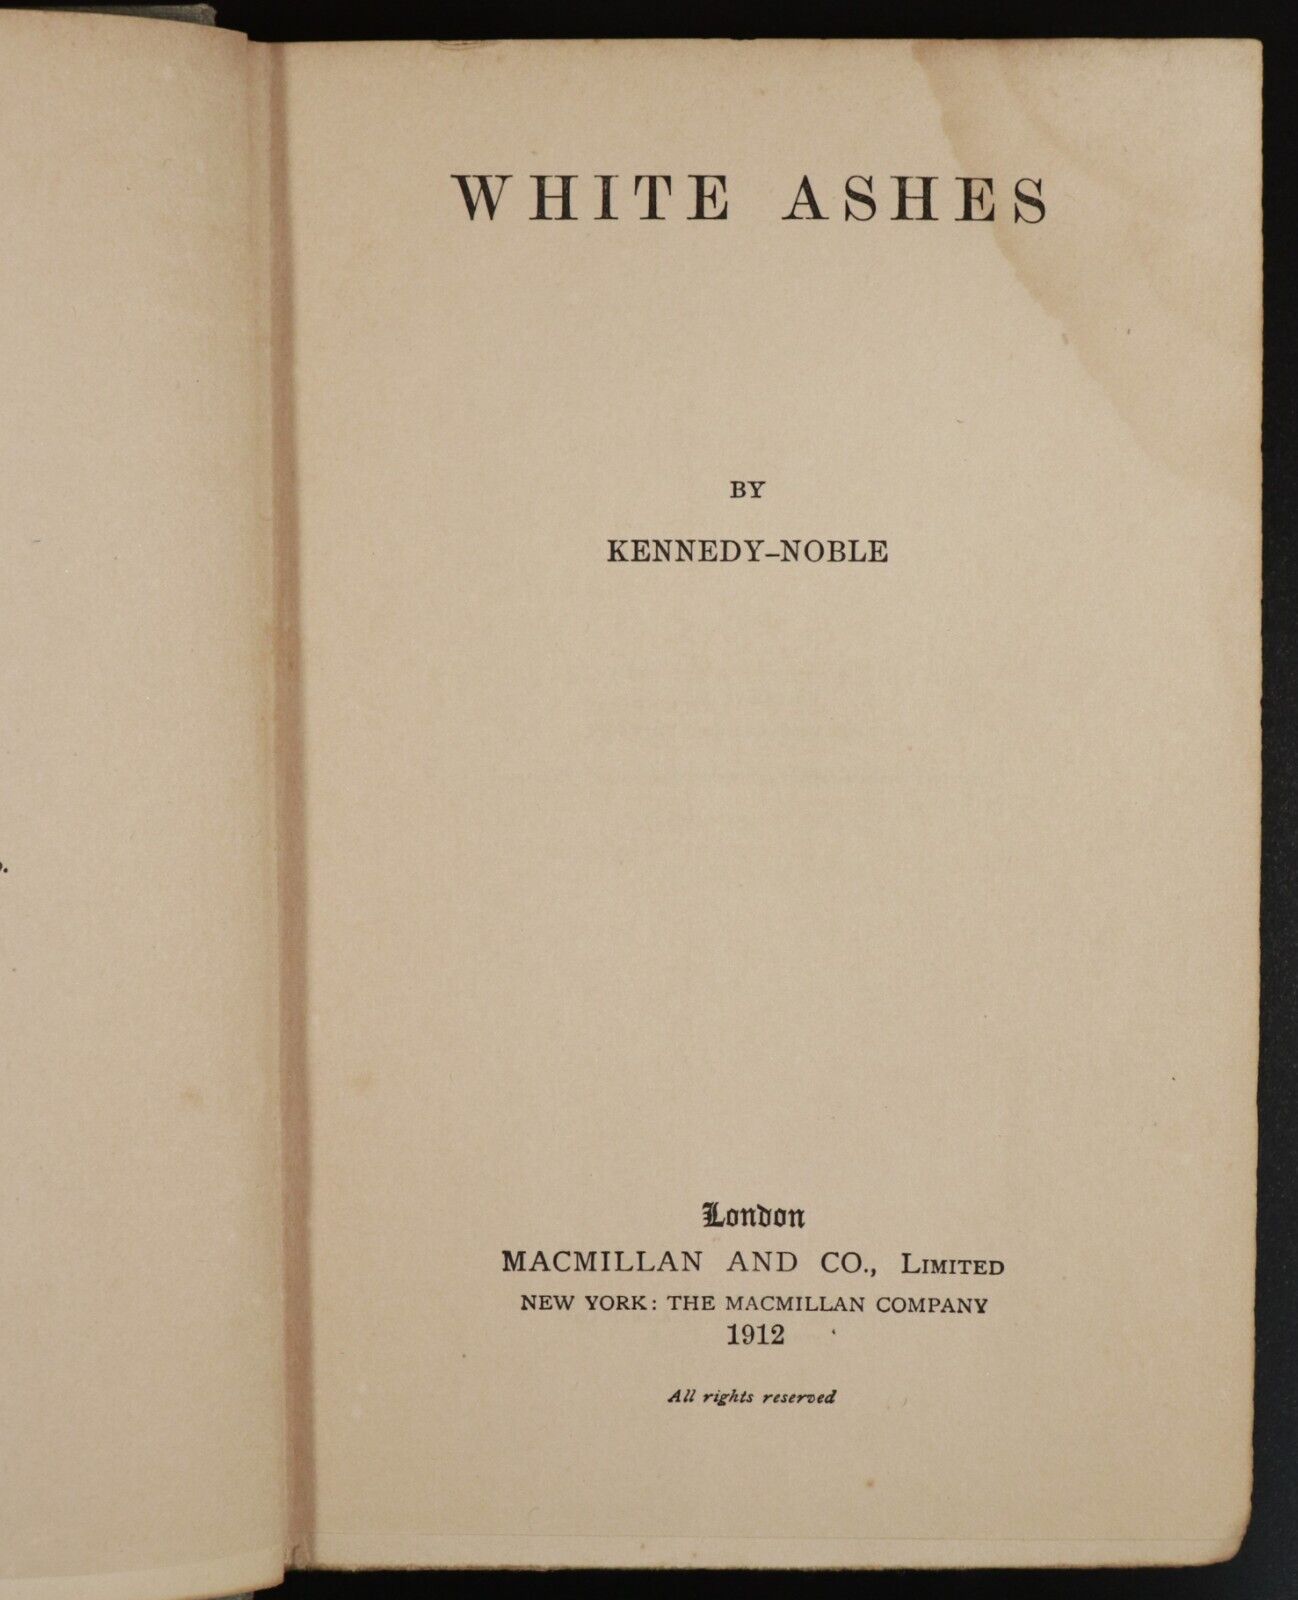 1912 White Ashes by S.R. Kennedy & A.C. Noble Antique American Fiction Book - 0